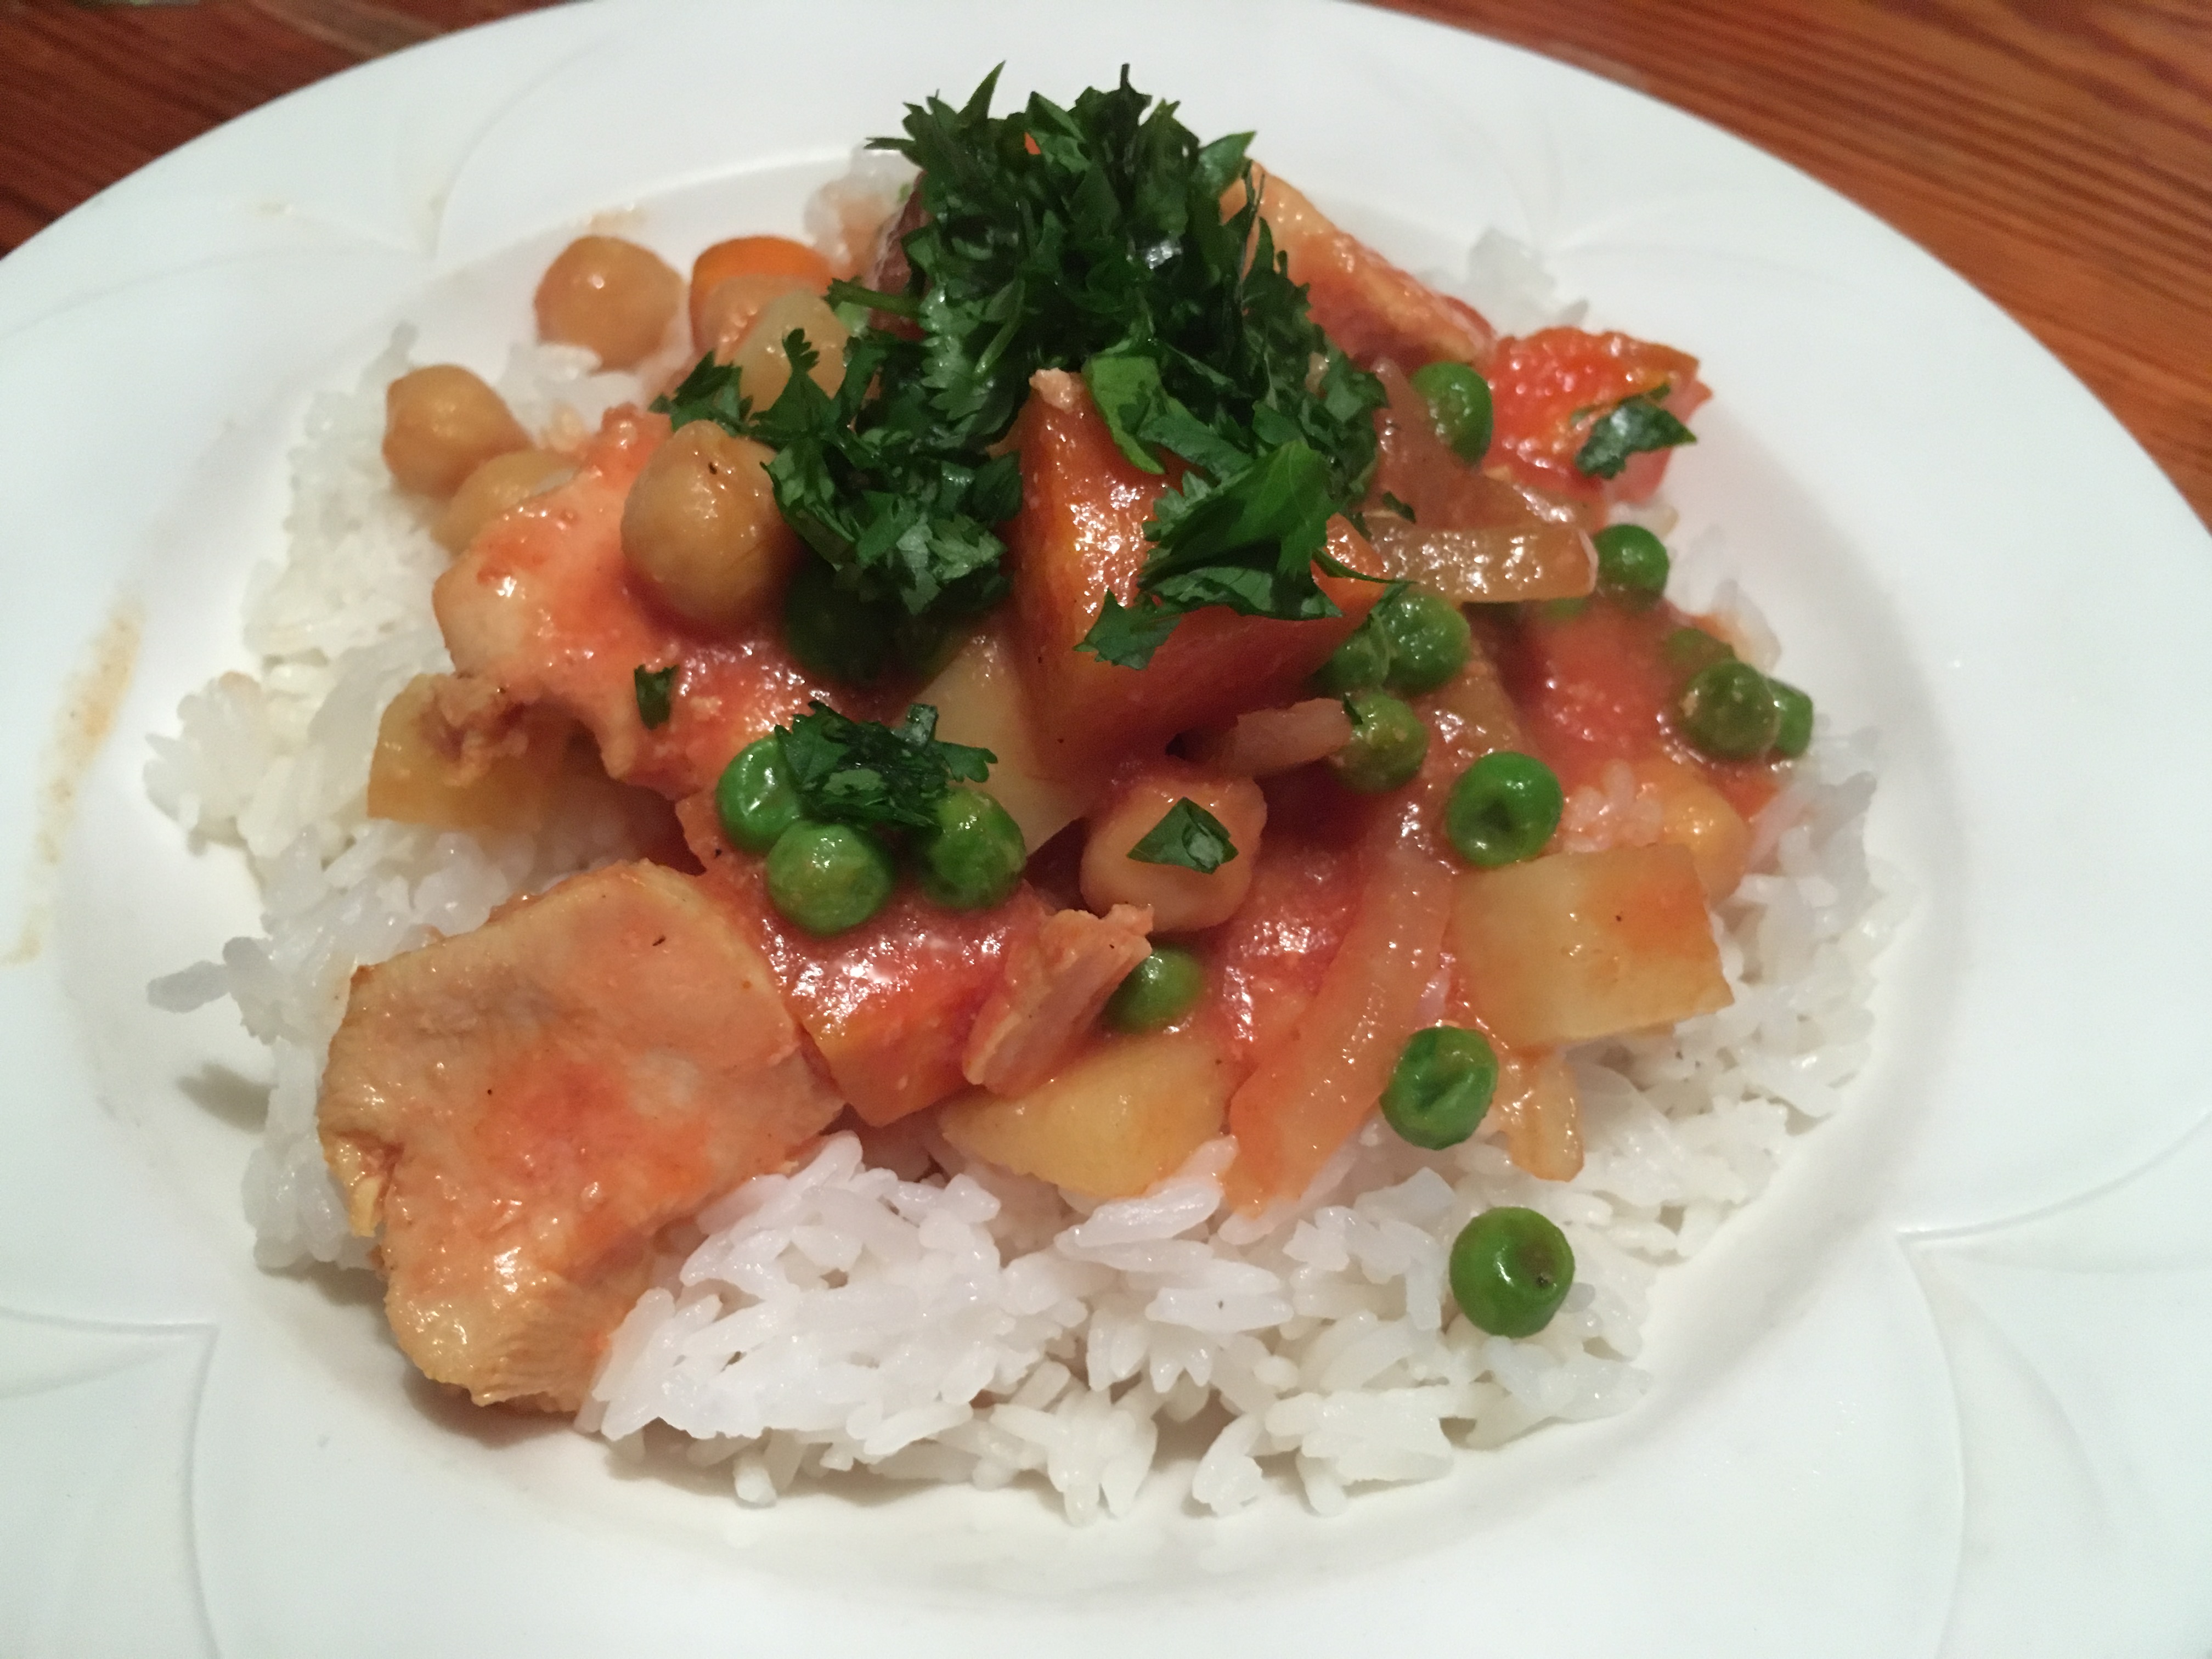 Boneless Chicken Breast with Tomatoes, Coconut Milk, and Chickpeas in the Slow Cooker